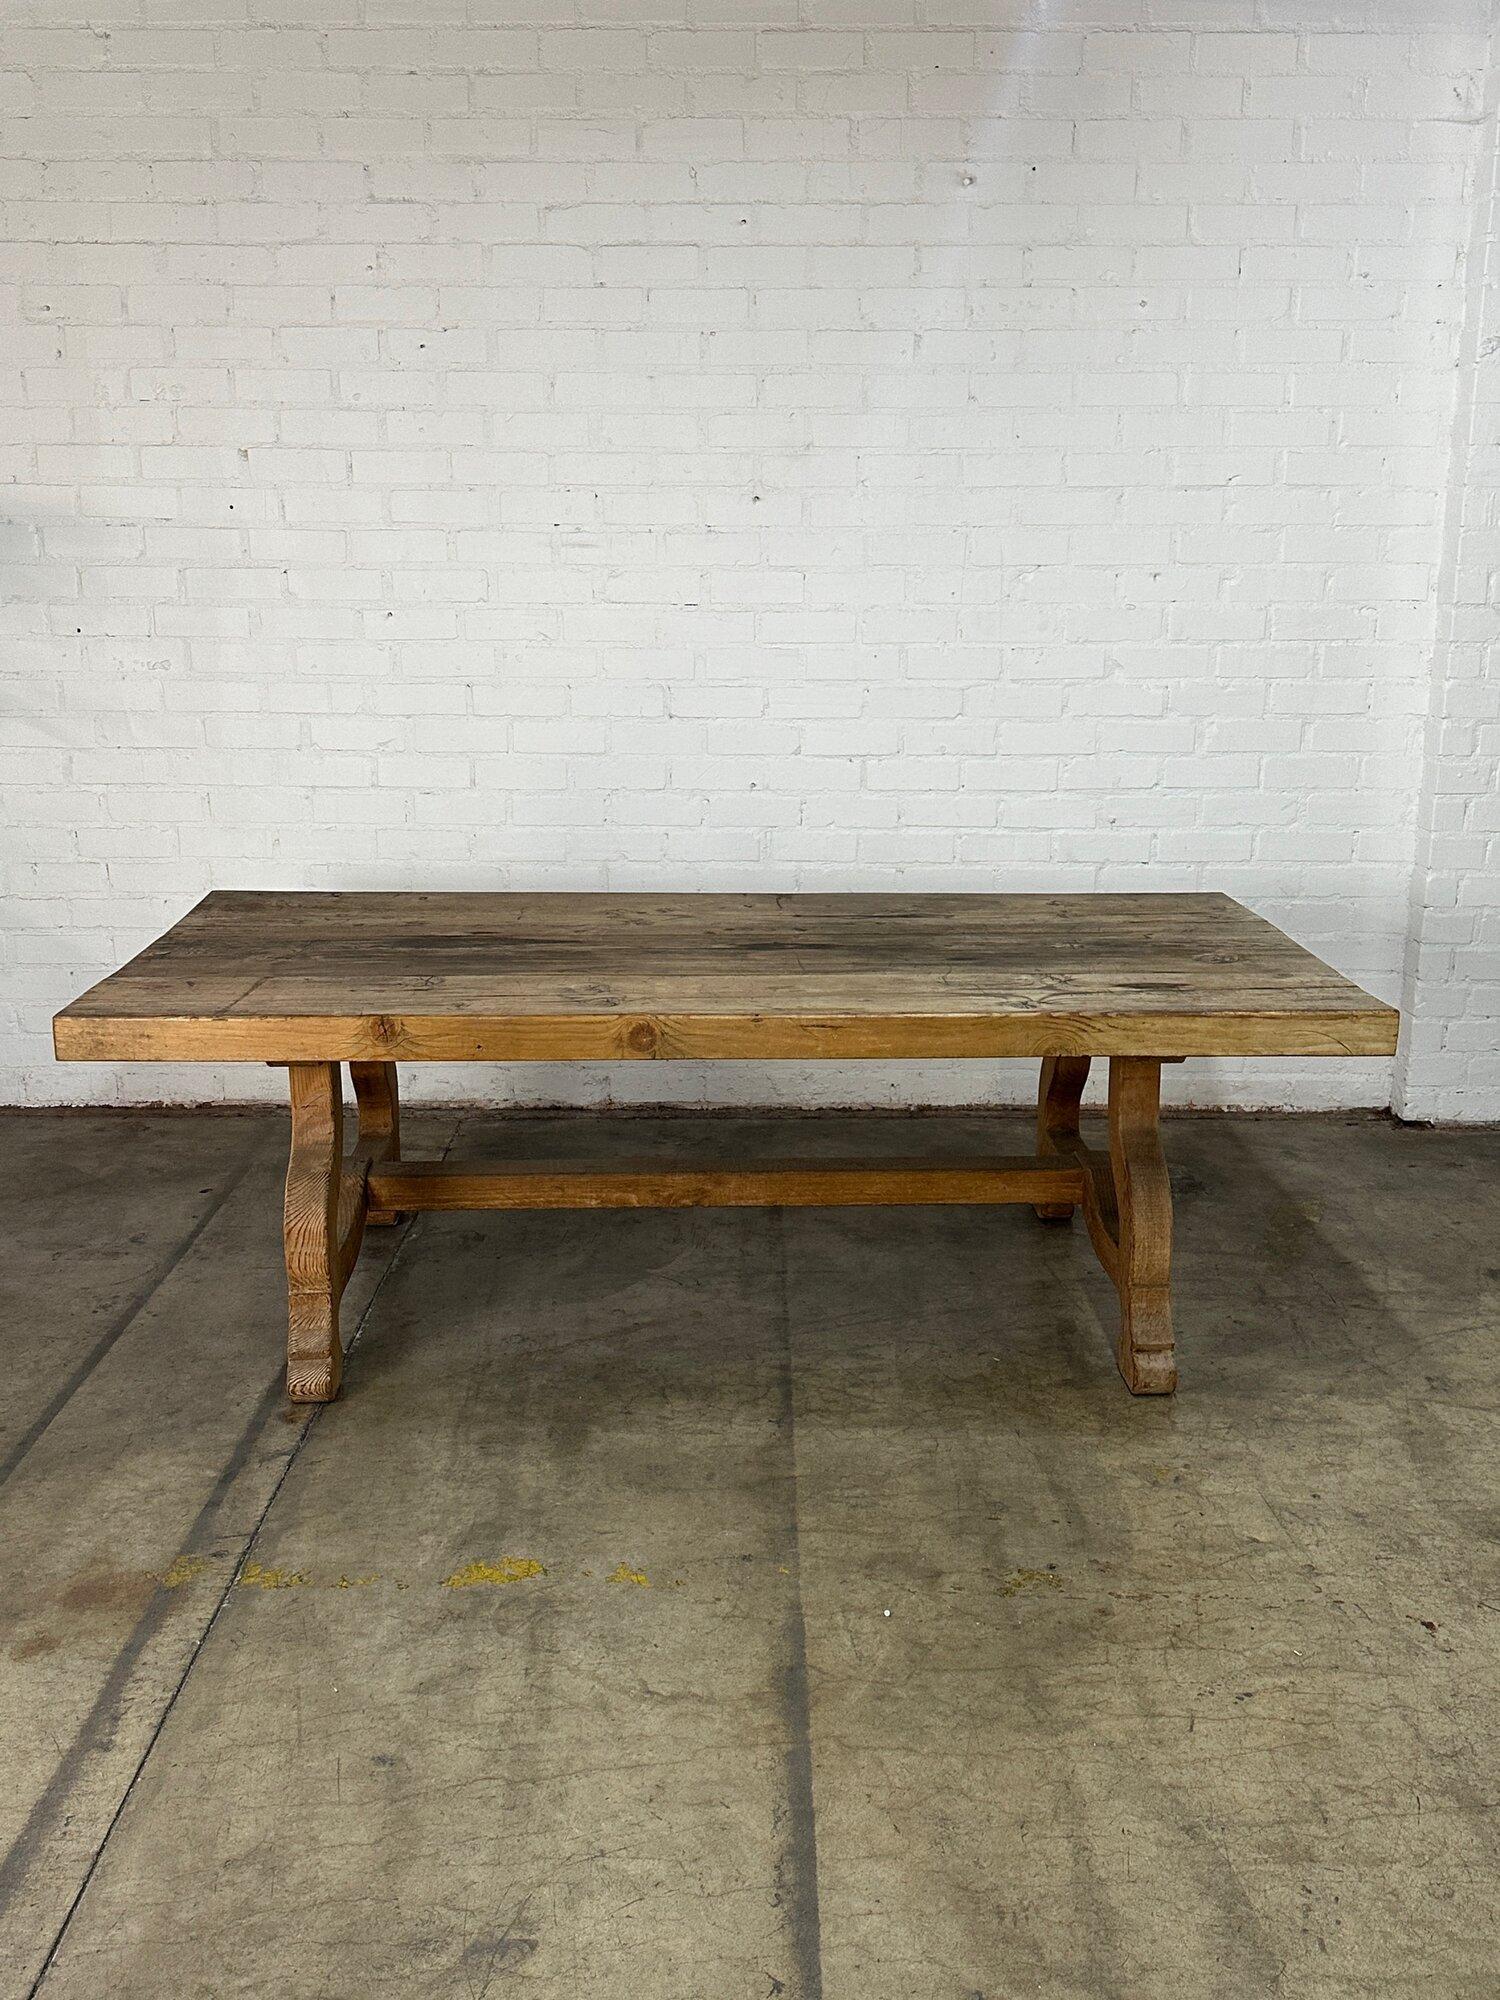 W96 D45 H31.5 Knee Clearance 27.5

VIntage aged and distressed trestle table in solid wooden construction. Table is very heavy and structurally sound and sturdy. Item is in as found aged condition with ample patina. Table will require a minimum of